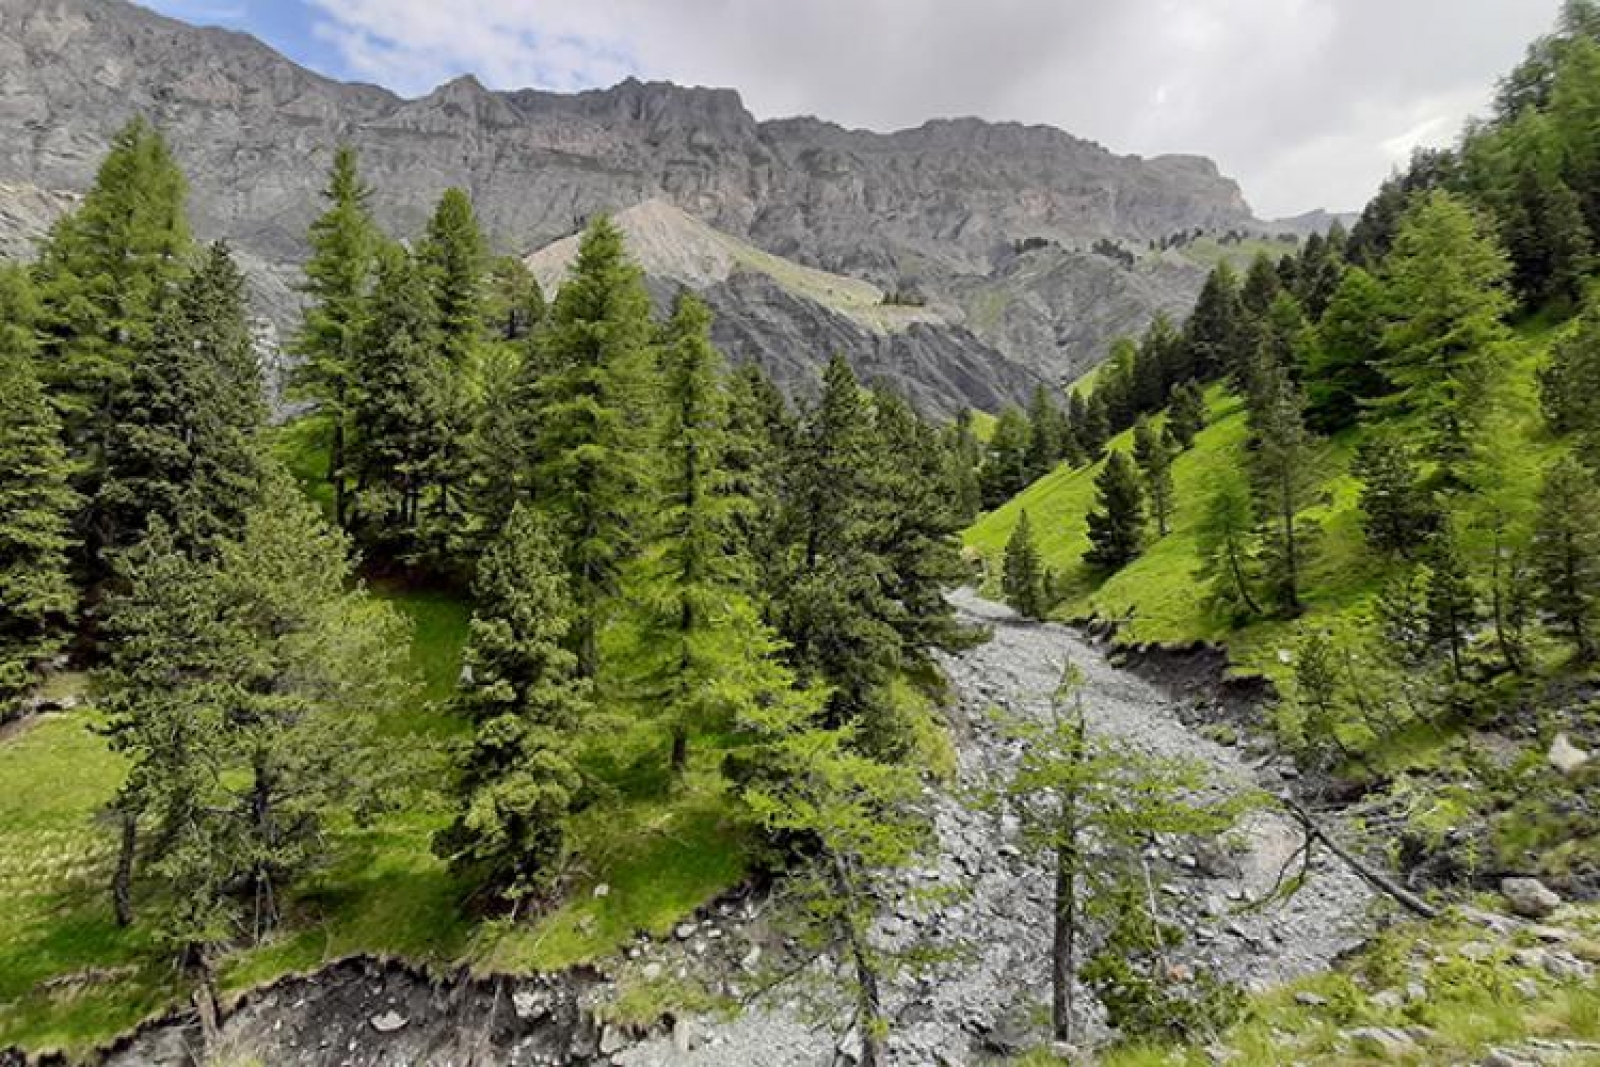 An strict nature reserve the heart of the Mercantour National Park